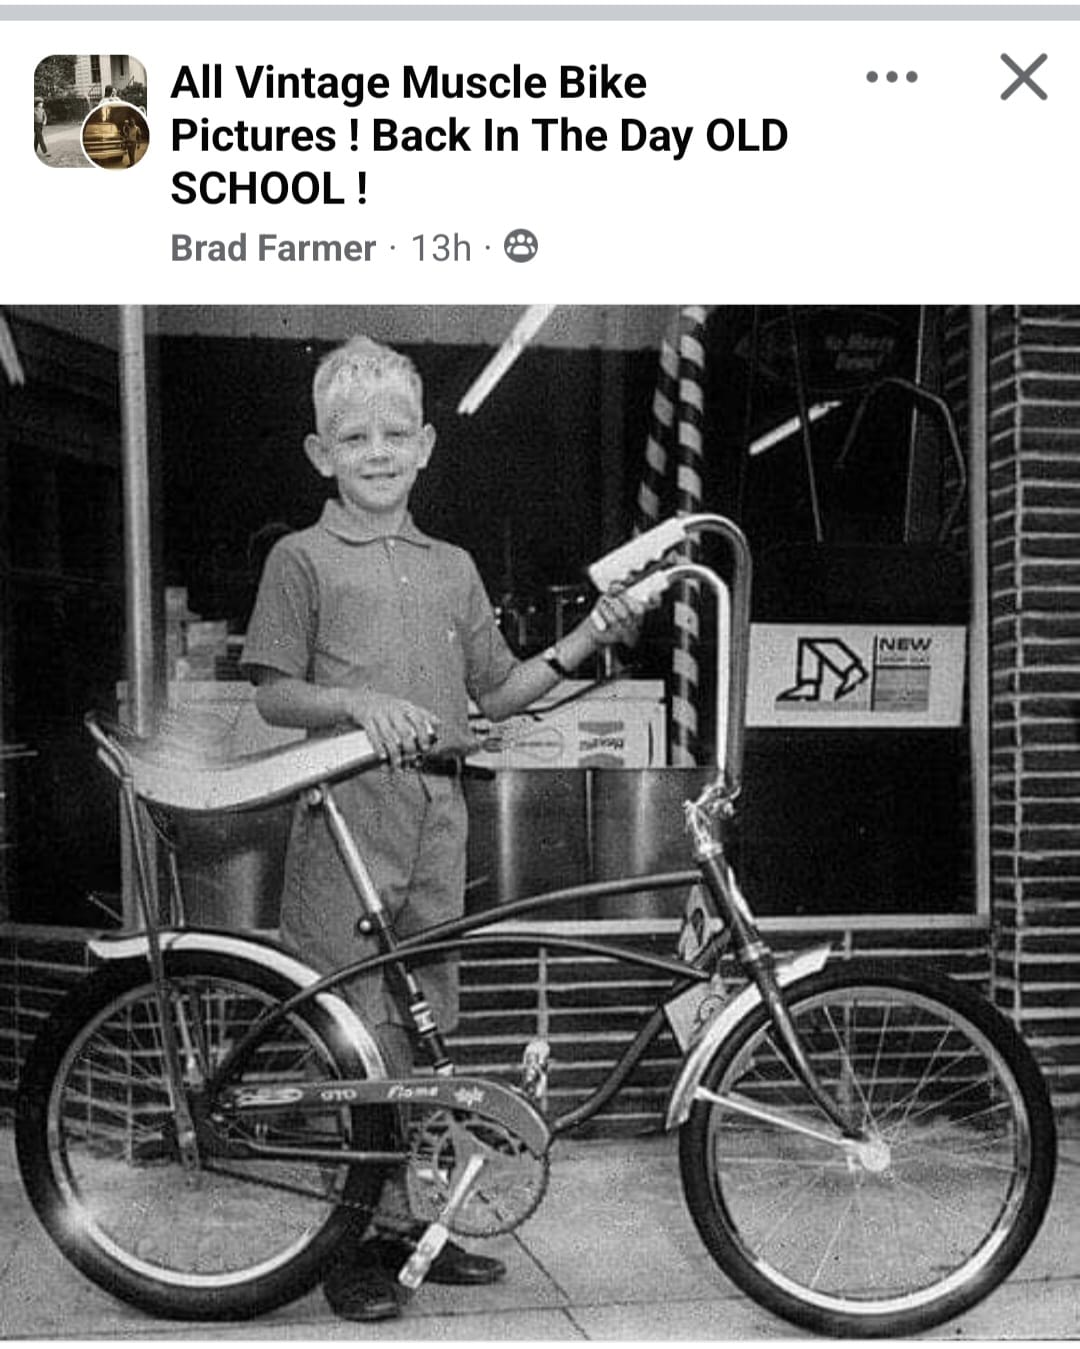 May be an image of 1 person, bicycle and text